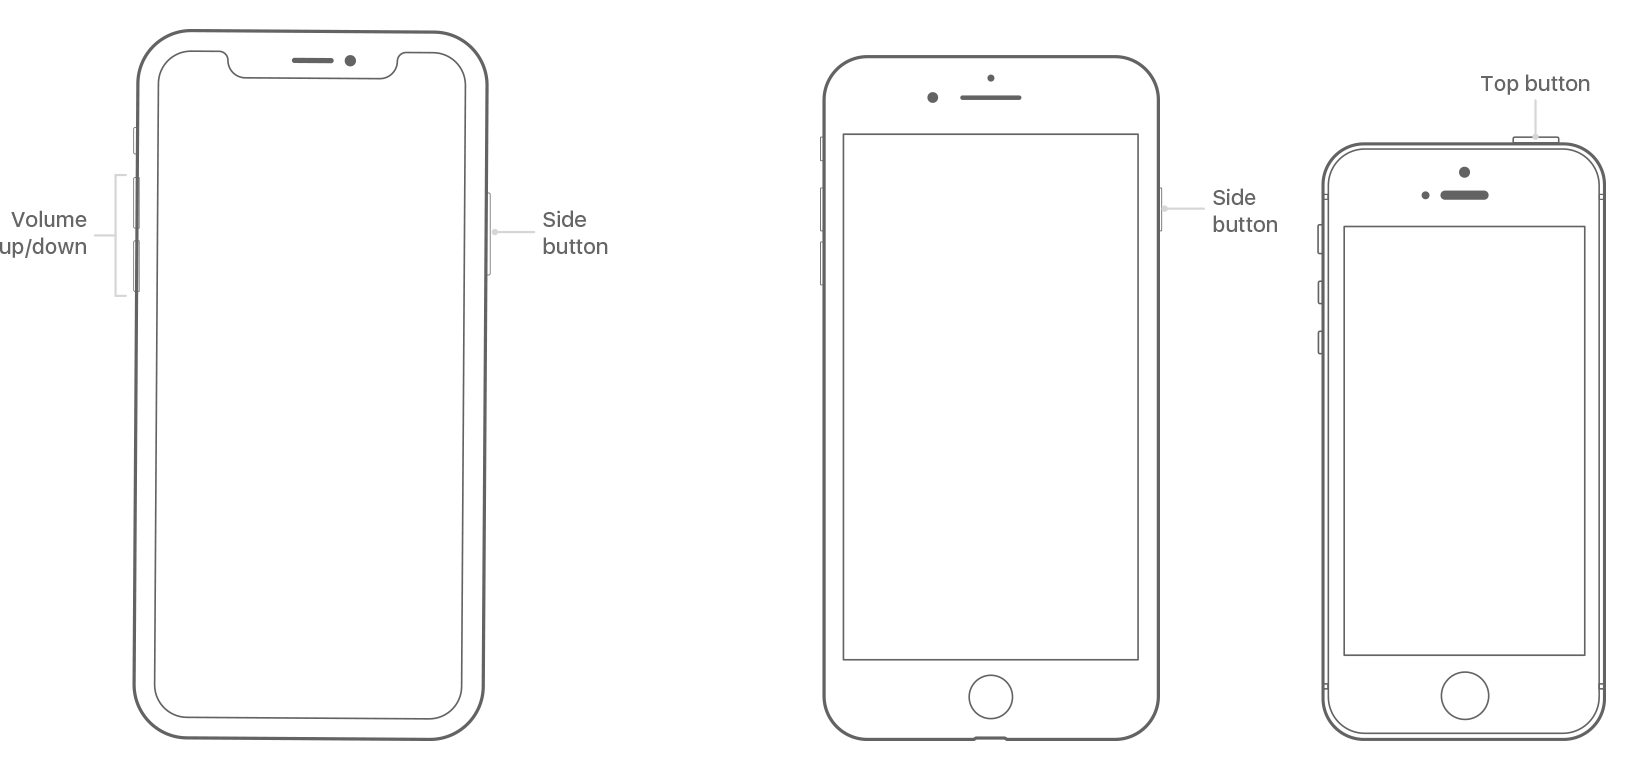 iPhone power buttons illustration